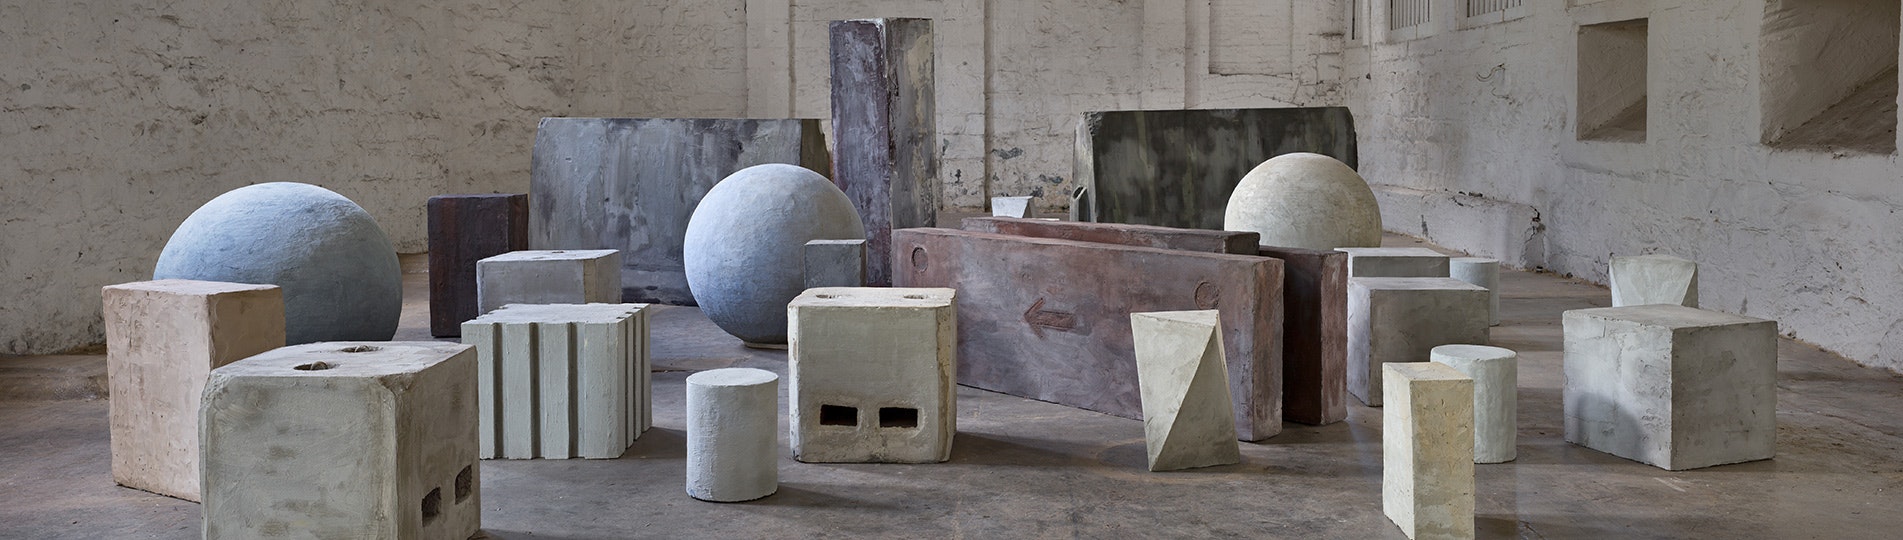 A photo of a collection of cement sculptures that are spheres, cubes and cuboids by artist Nina Sanadze